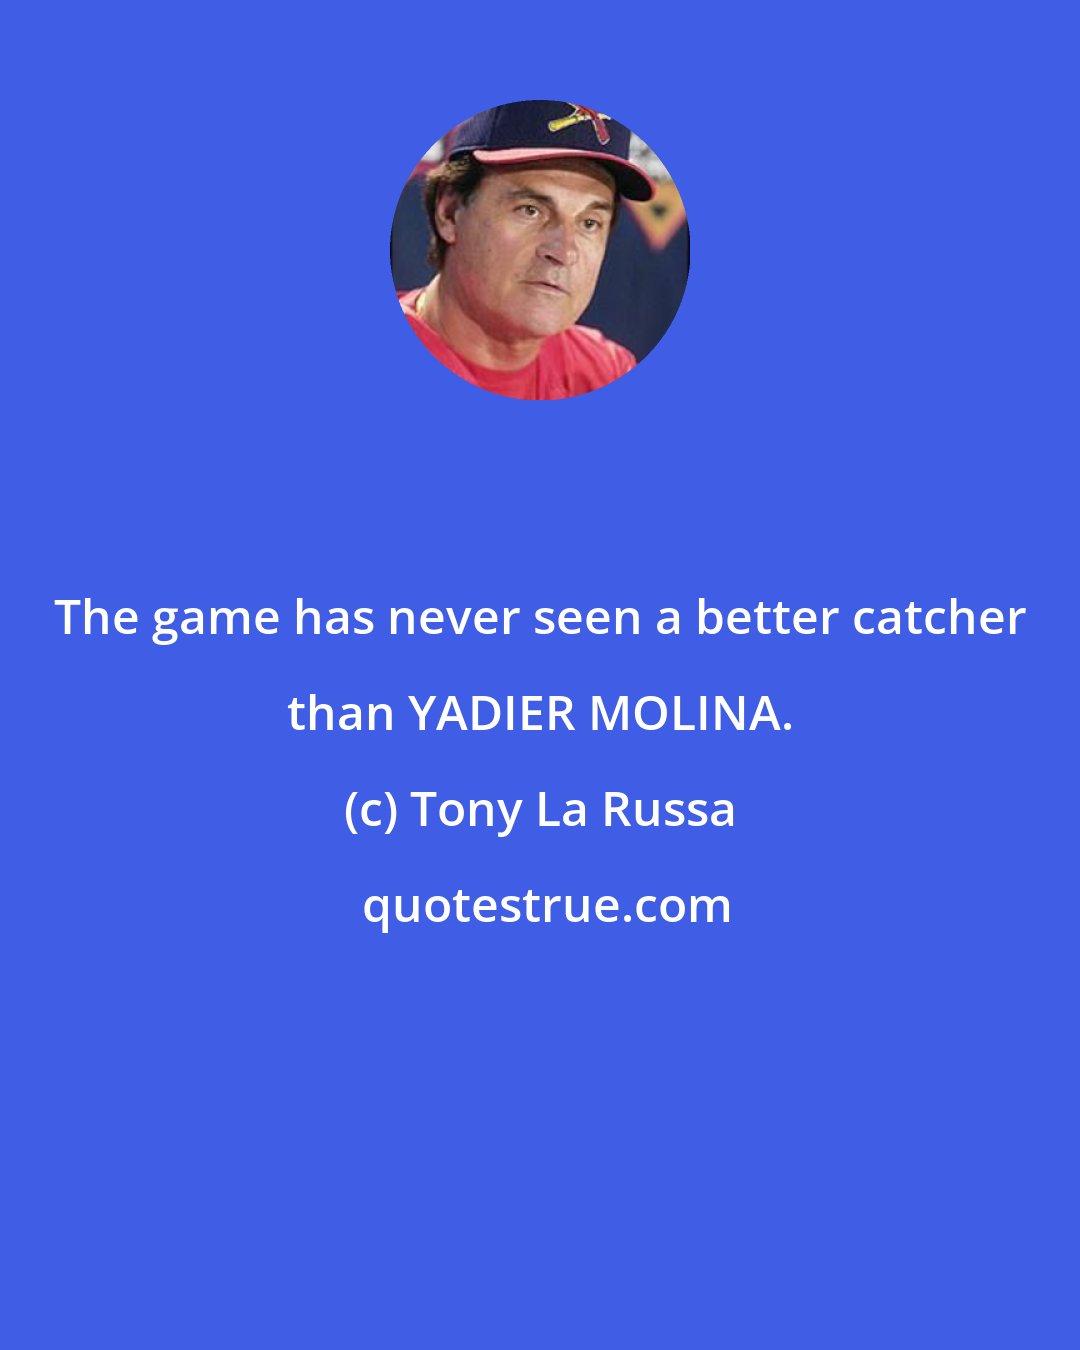 Tony La Russa: The game has never seen a better catcher than YADIER MOLINA.